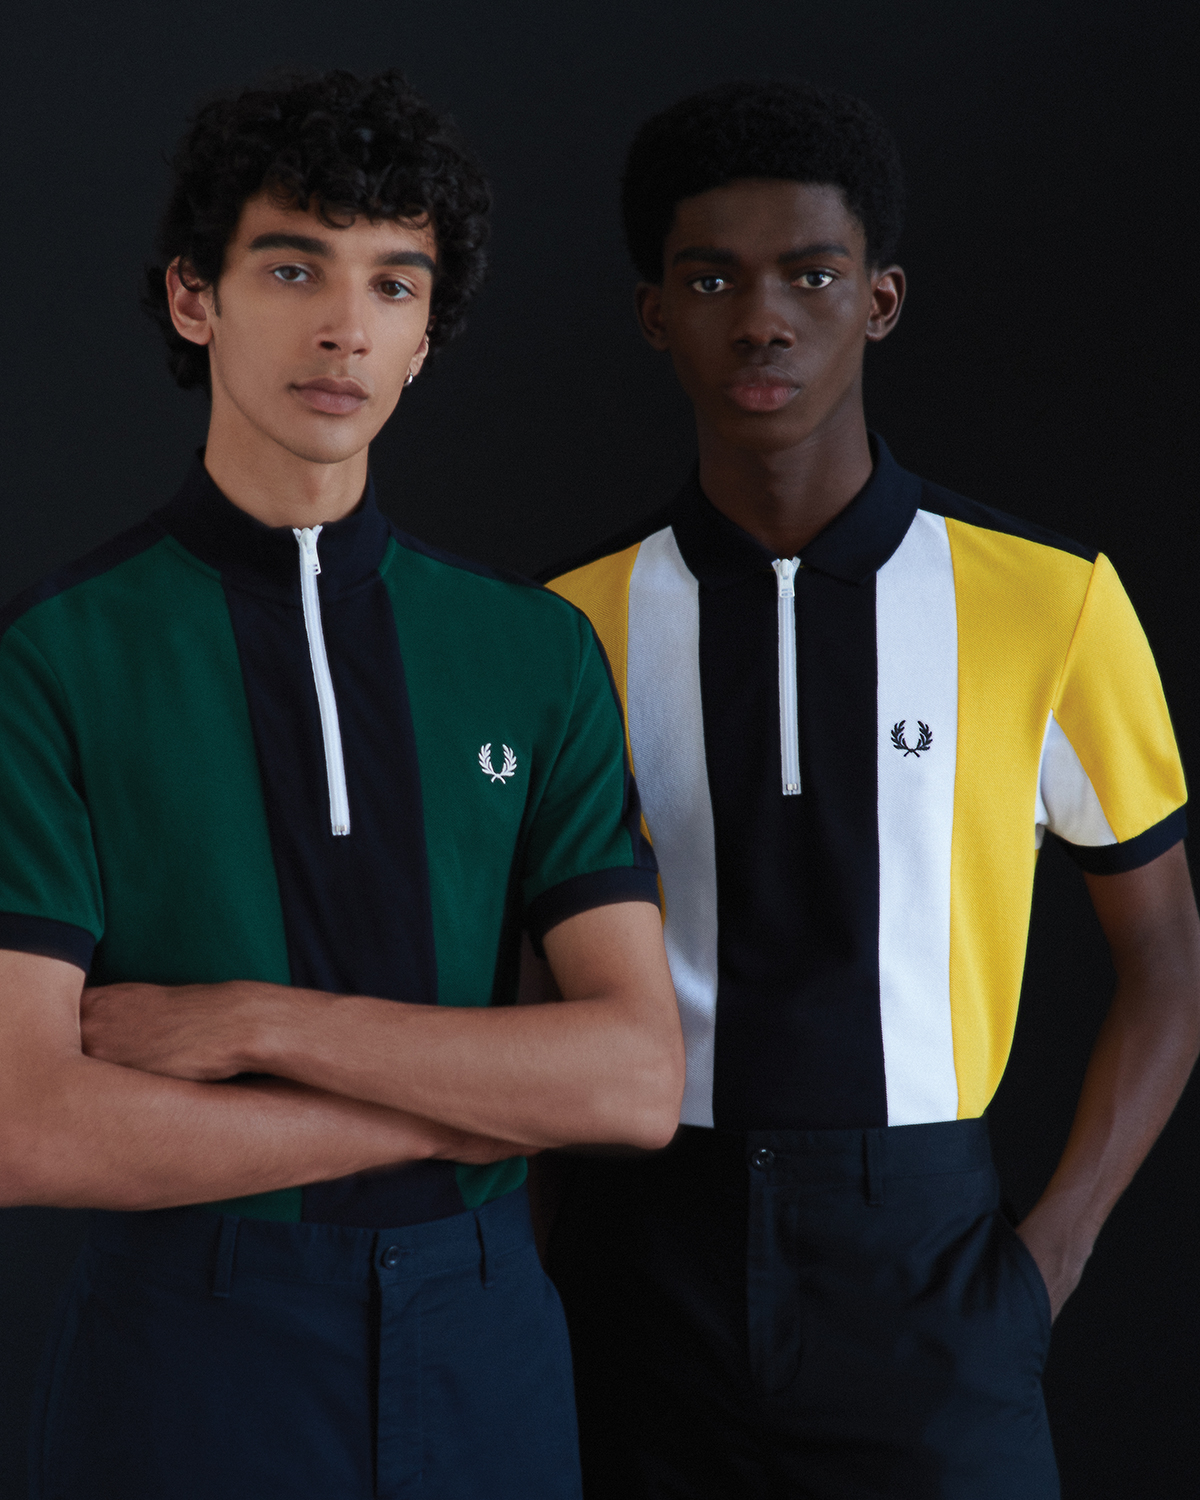 Le polo progettate per distinguersi. Cycling Jersey by Fred Perry